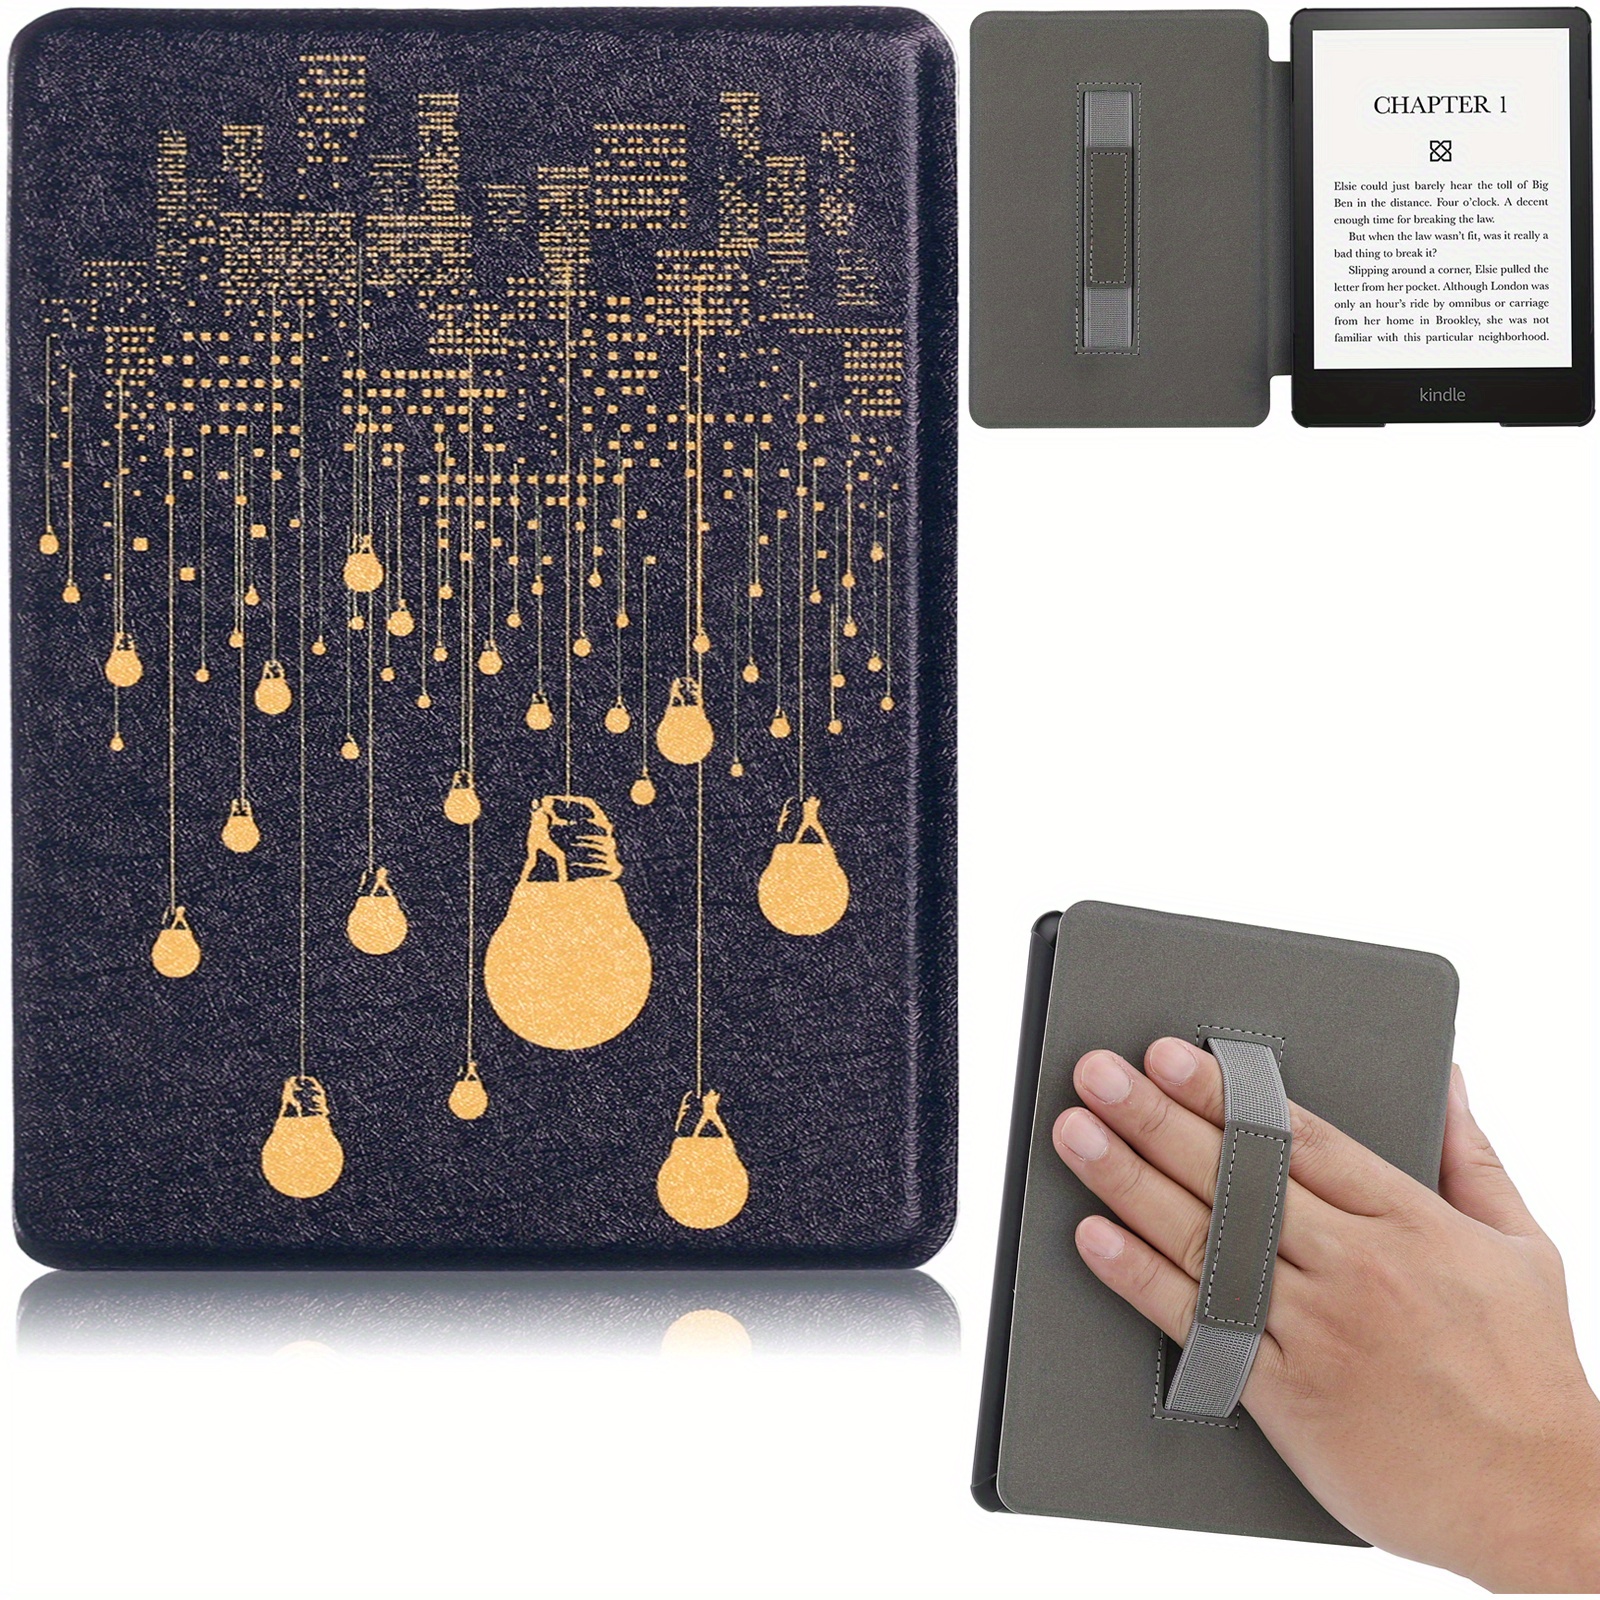 Kindle Paperwhite 7th Generation Covers Cases - Kindle 5 Case 11th  Generation 2023 - Aliexpress